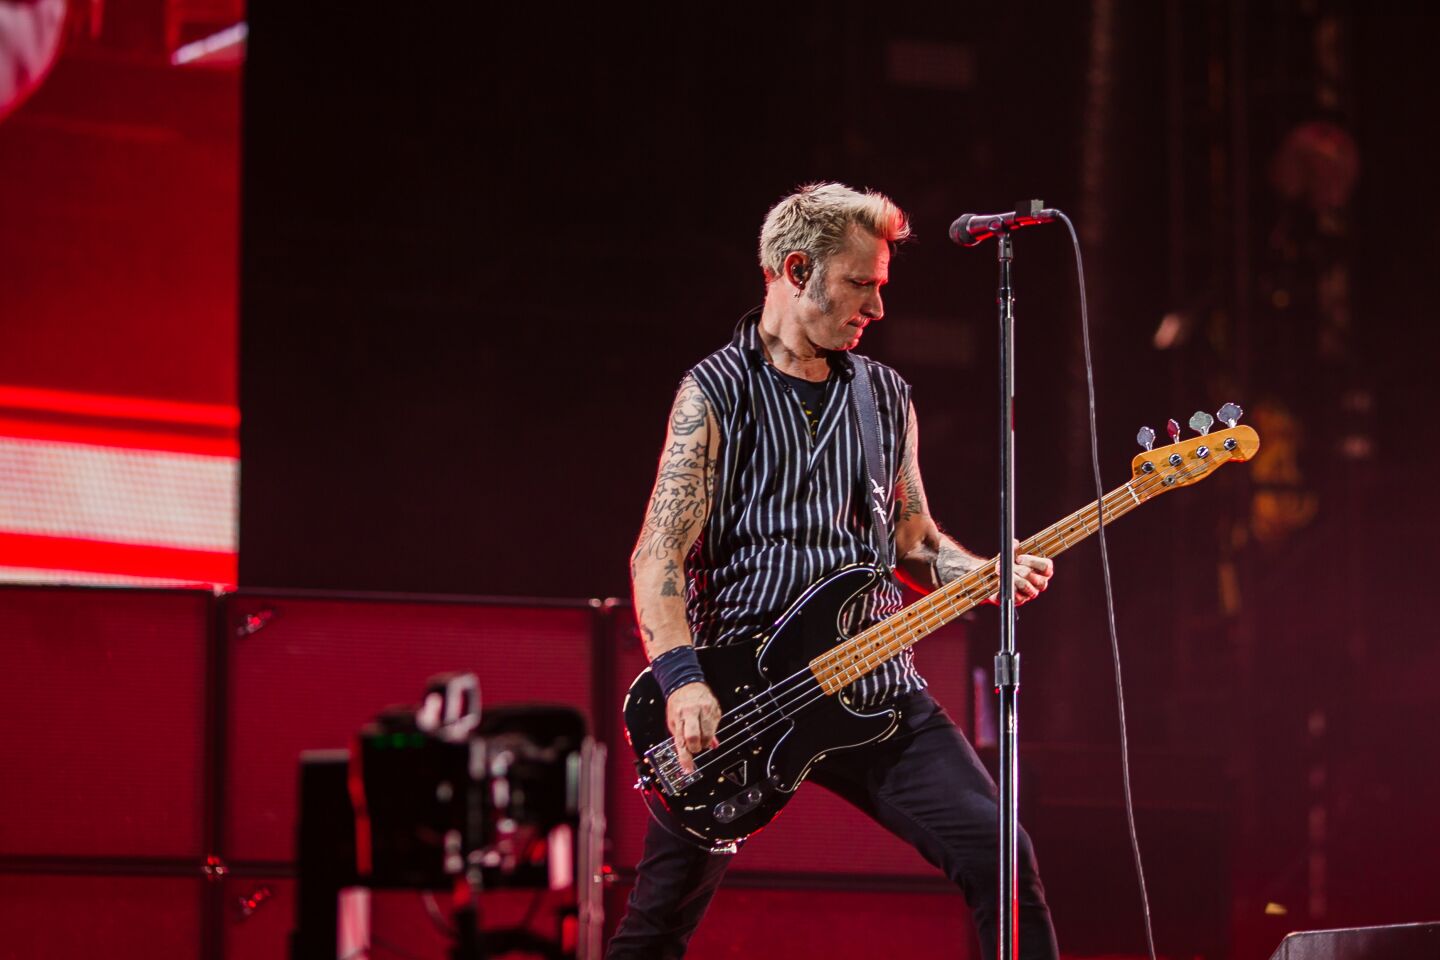 Bass guitarist Mike Dirnt of Green Day during the Hella Mega Tour at Petco Park in downtown San Diego on August 29, 2021.